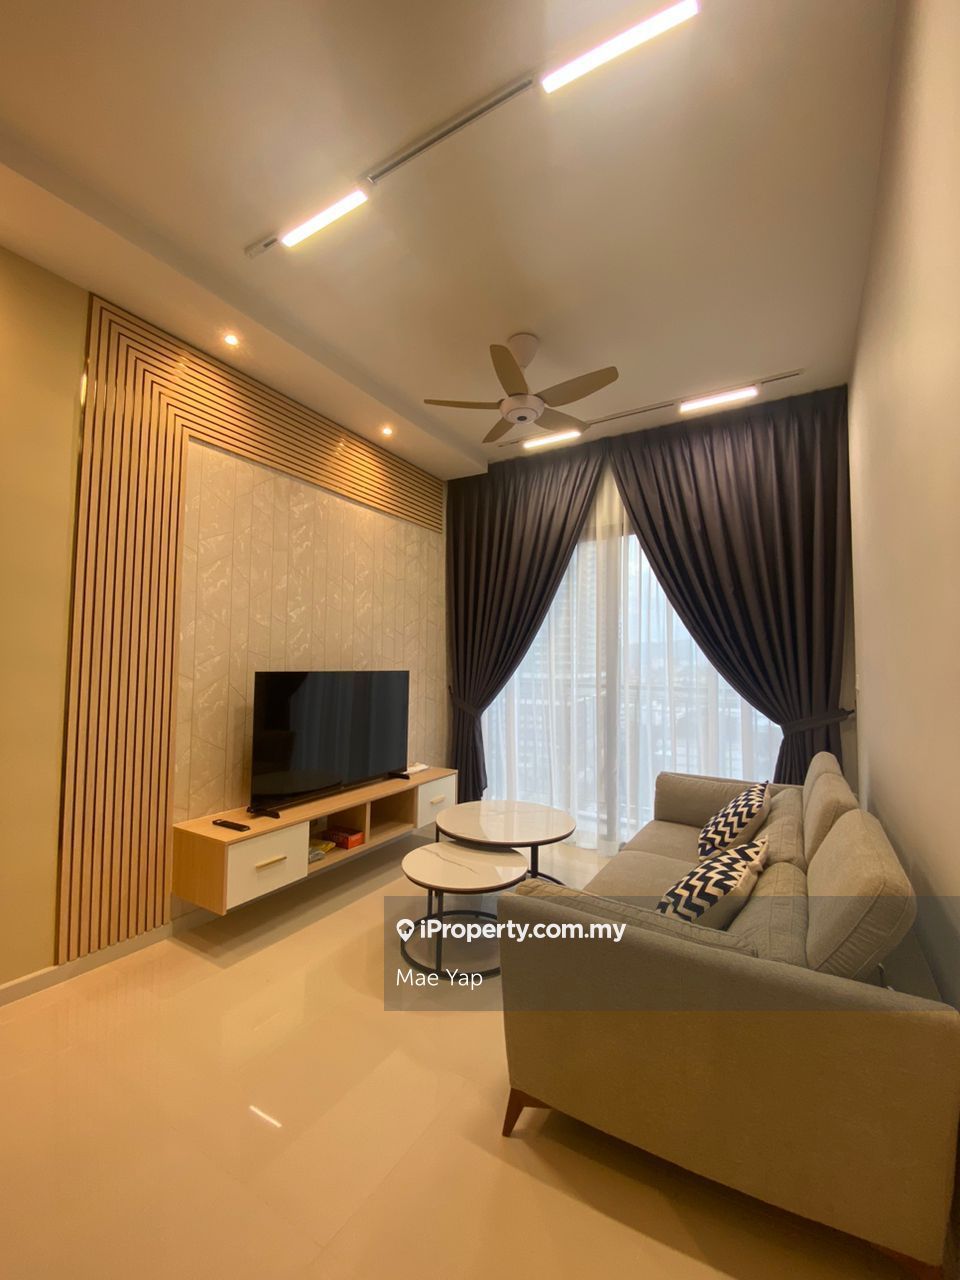 Sunway Velocity Two, Cheras for rent - RM3600 | iProperty Malaysia